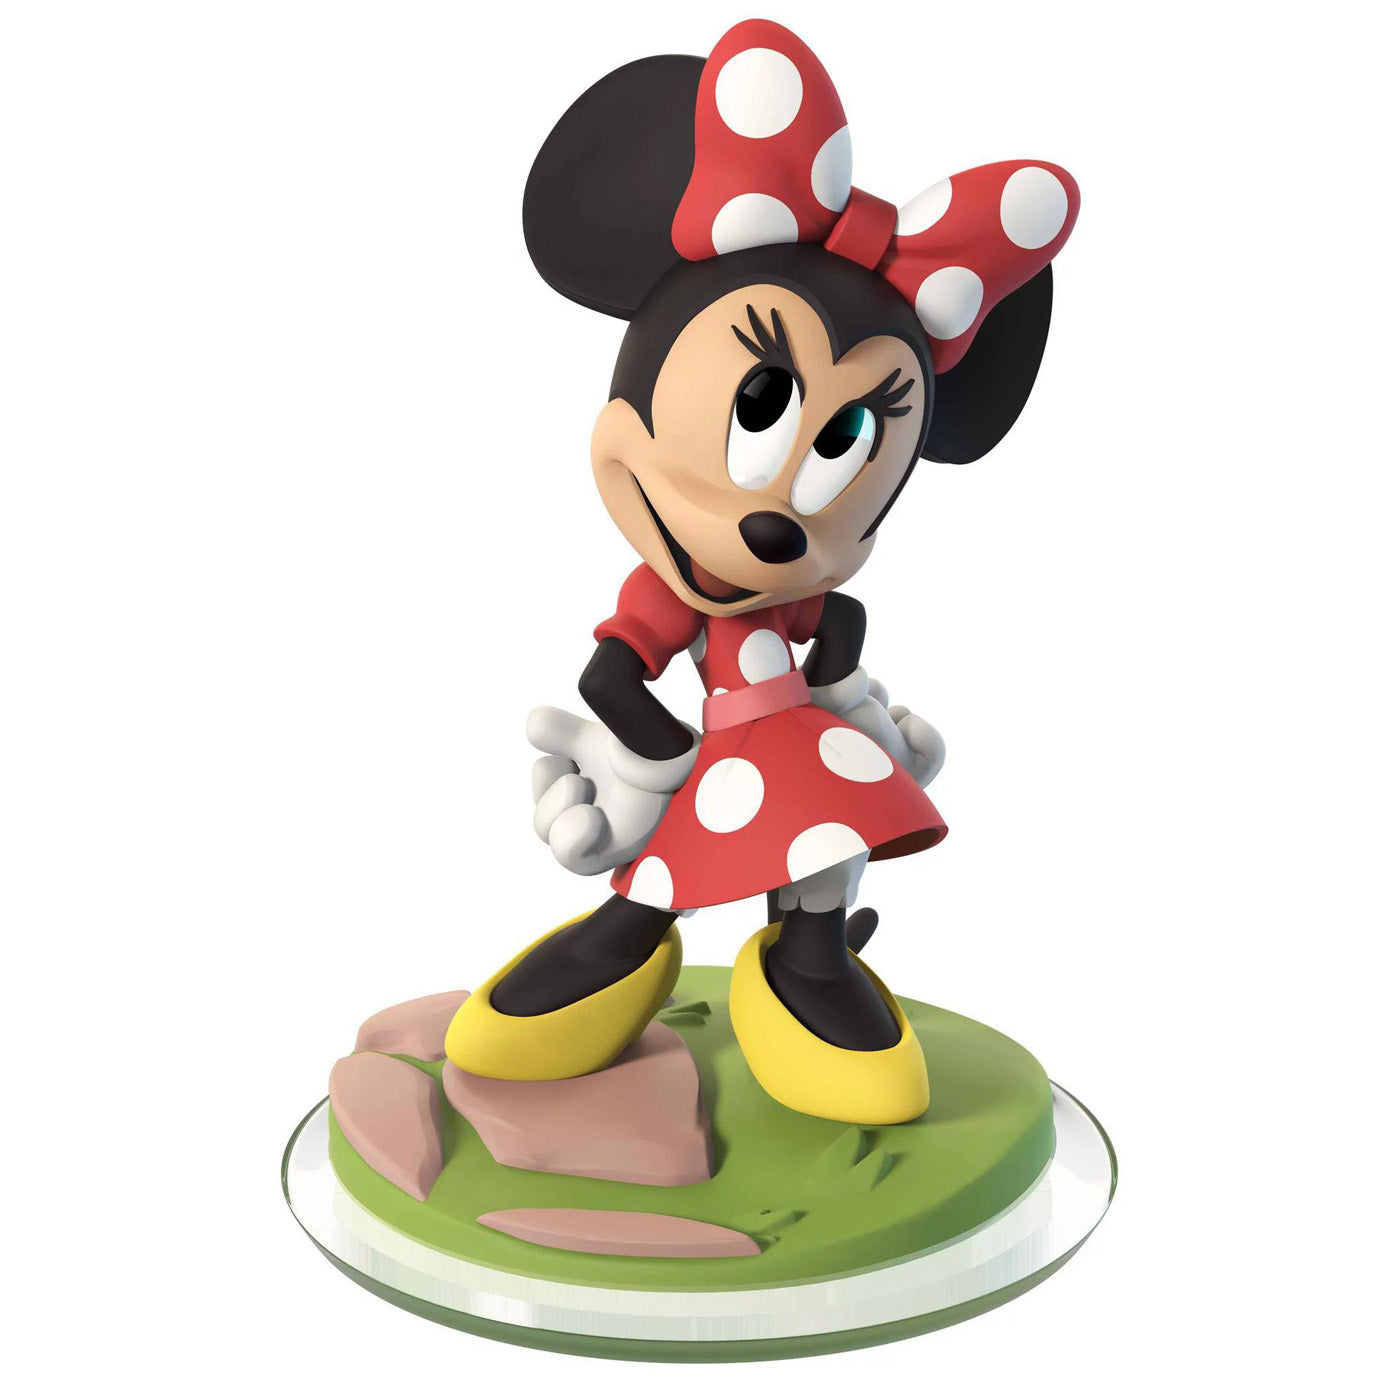 Disney Infinity 3.0 Character: Minnie Mouse